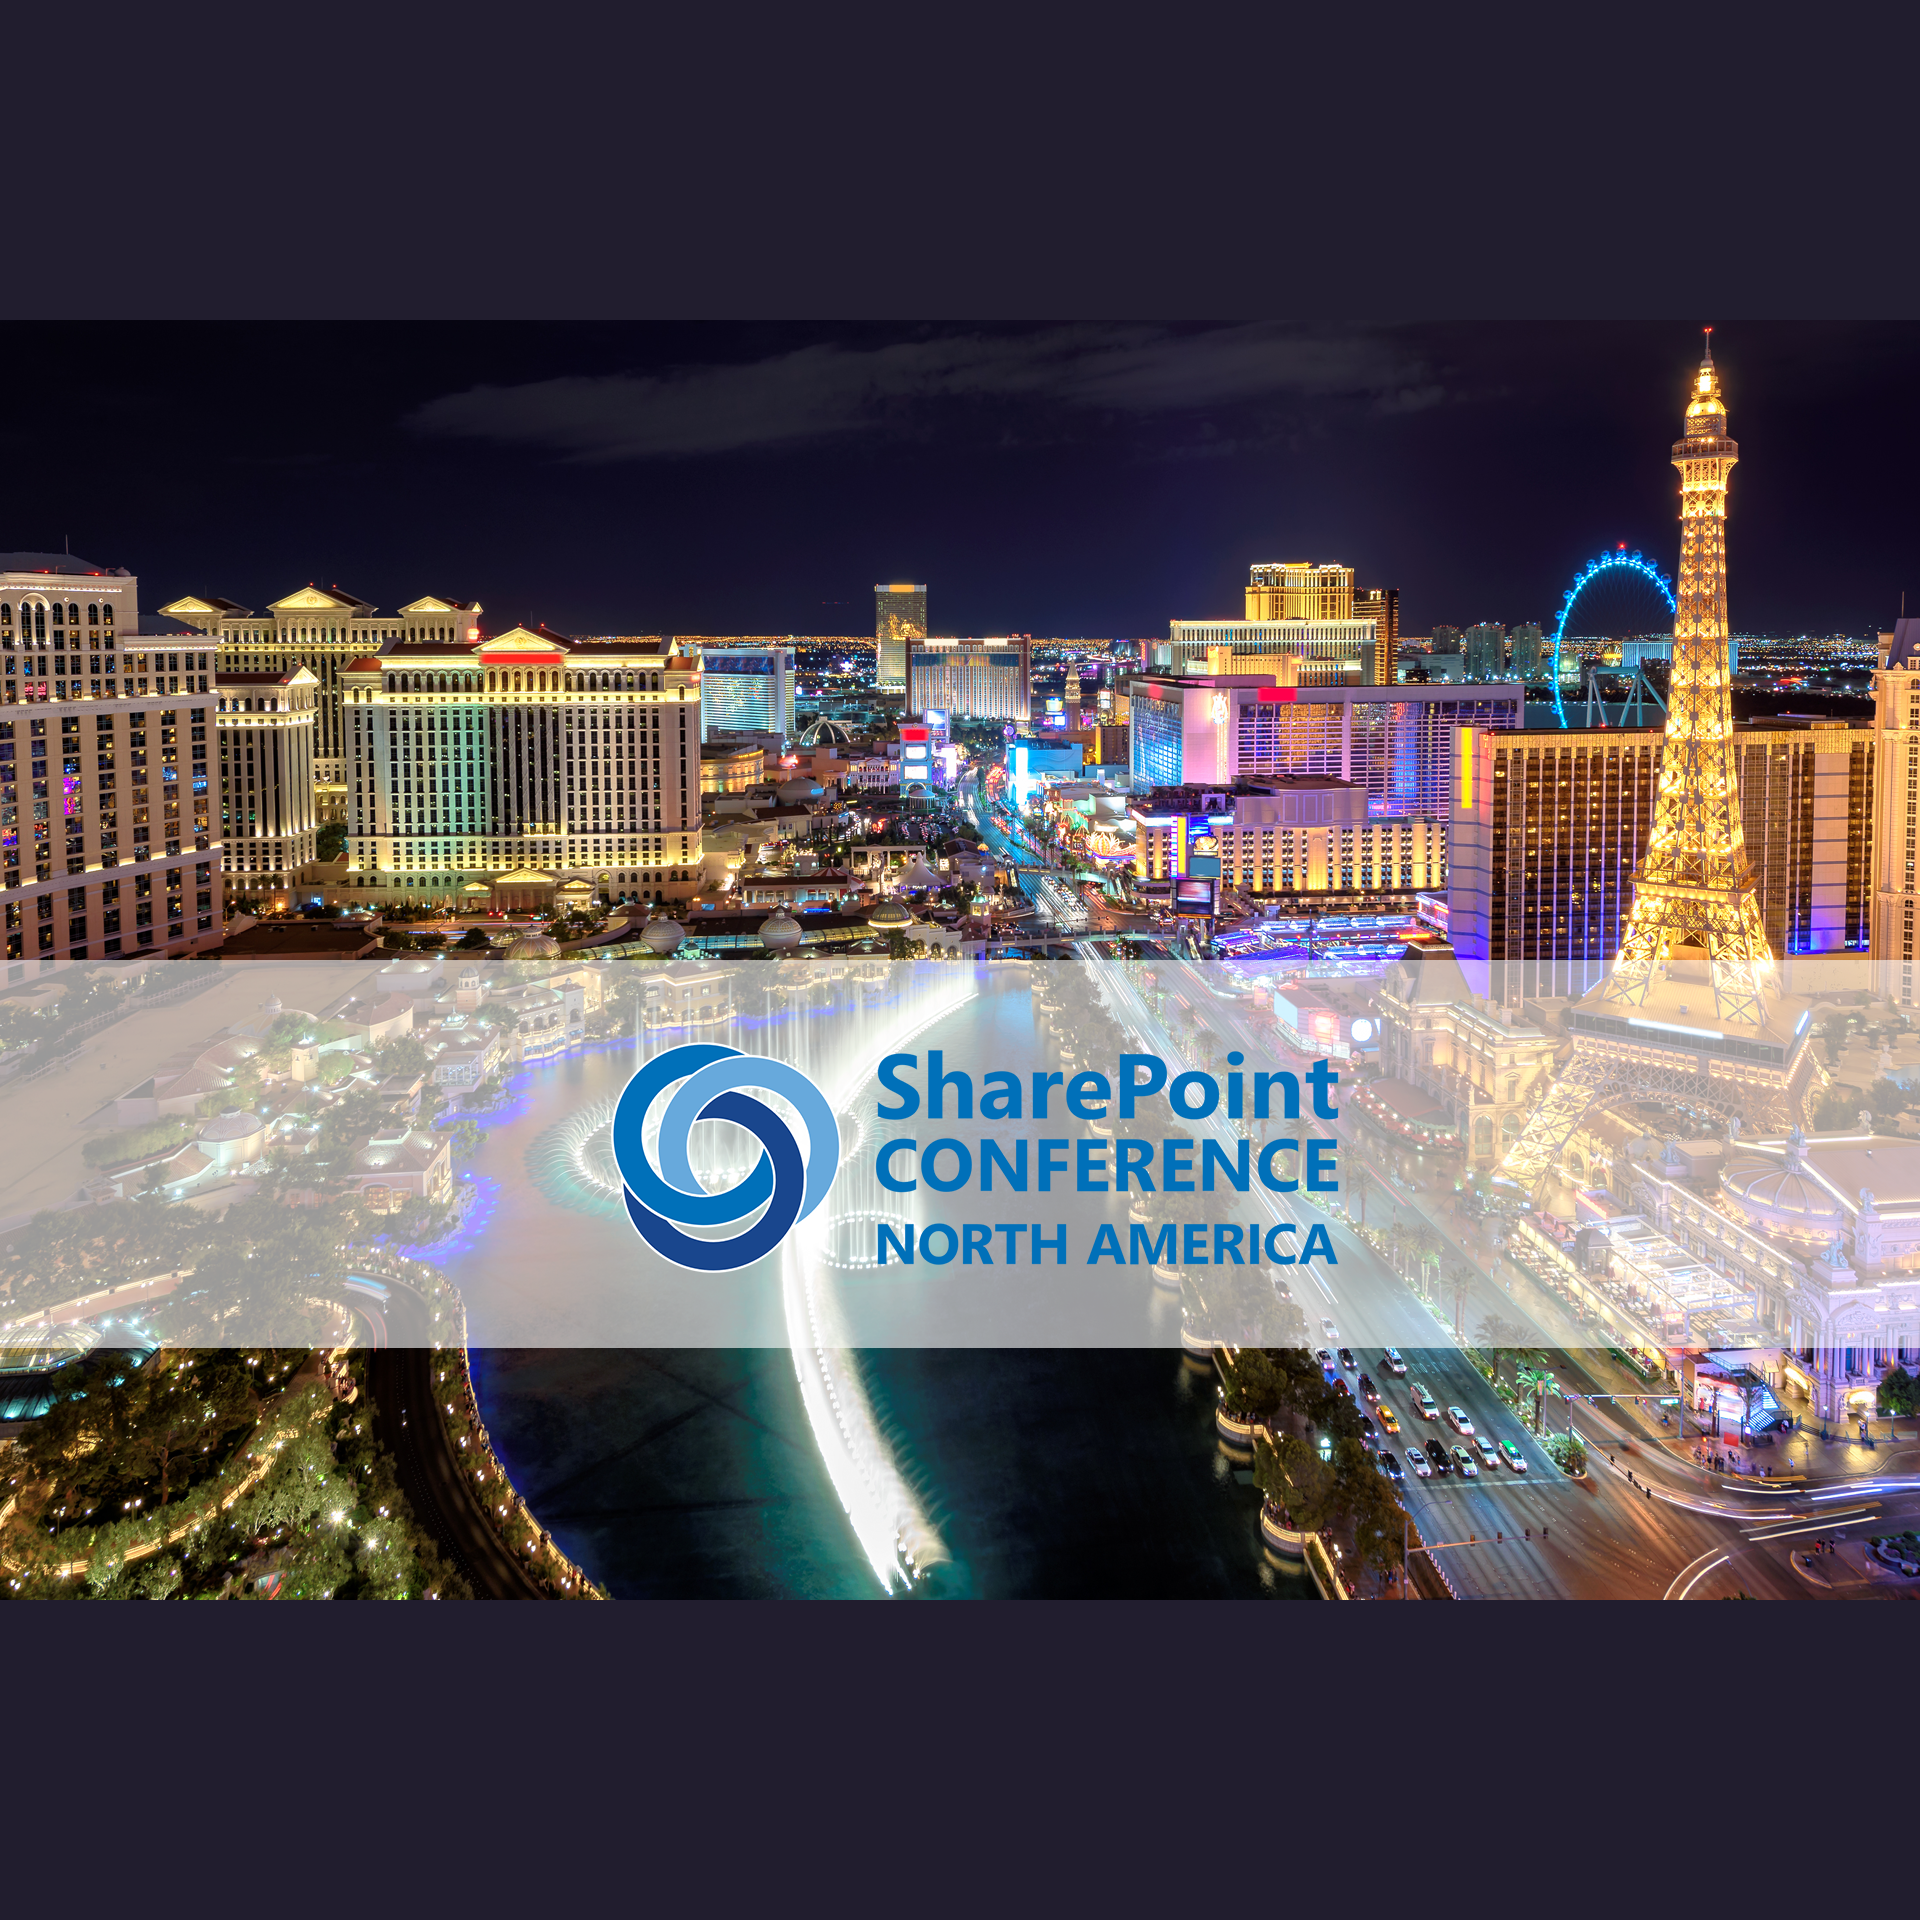 Image for blog article Join AxioWorks at SharePoint Conference North America in Las Vegas!